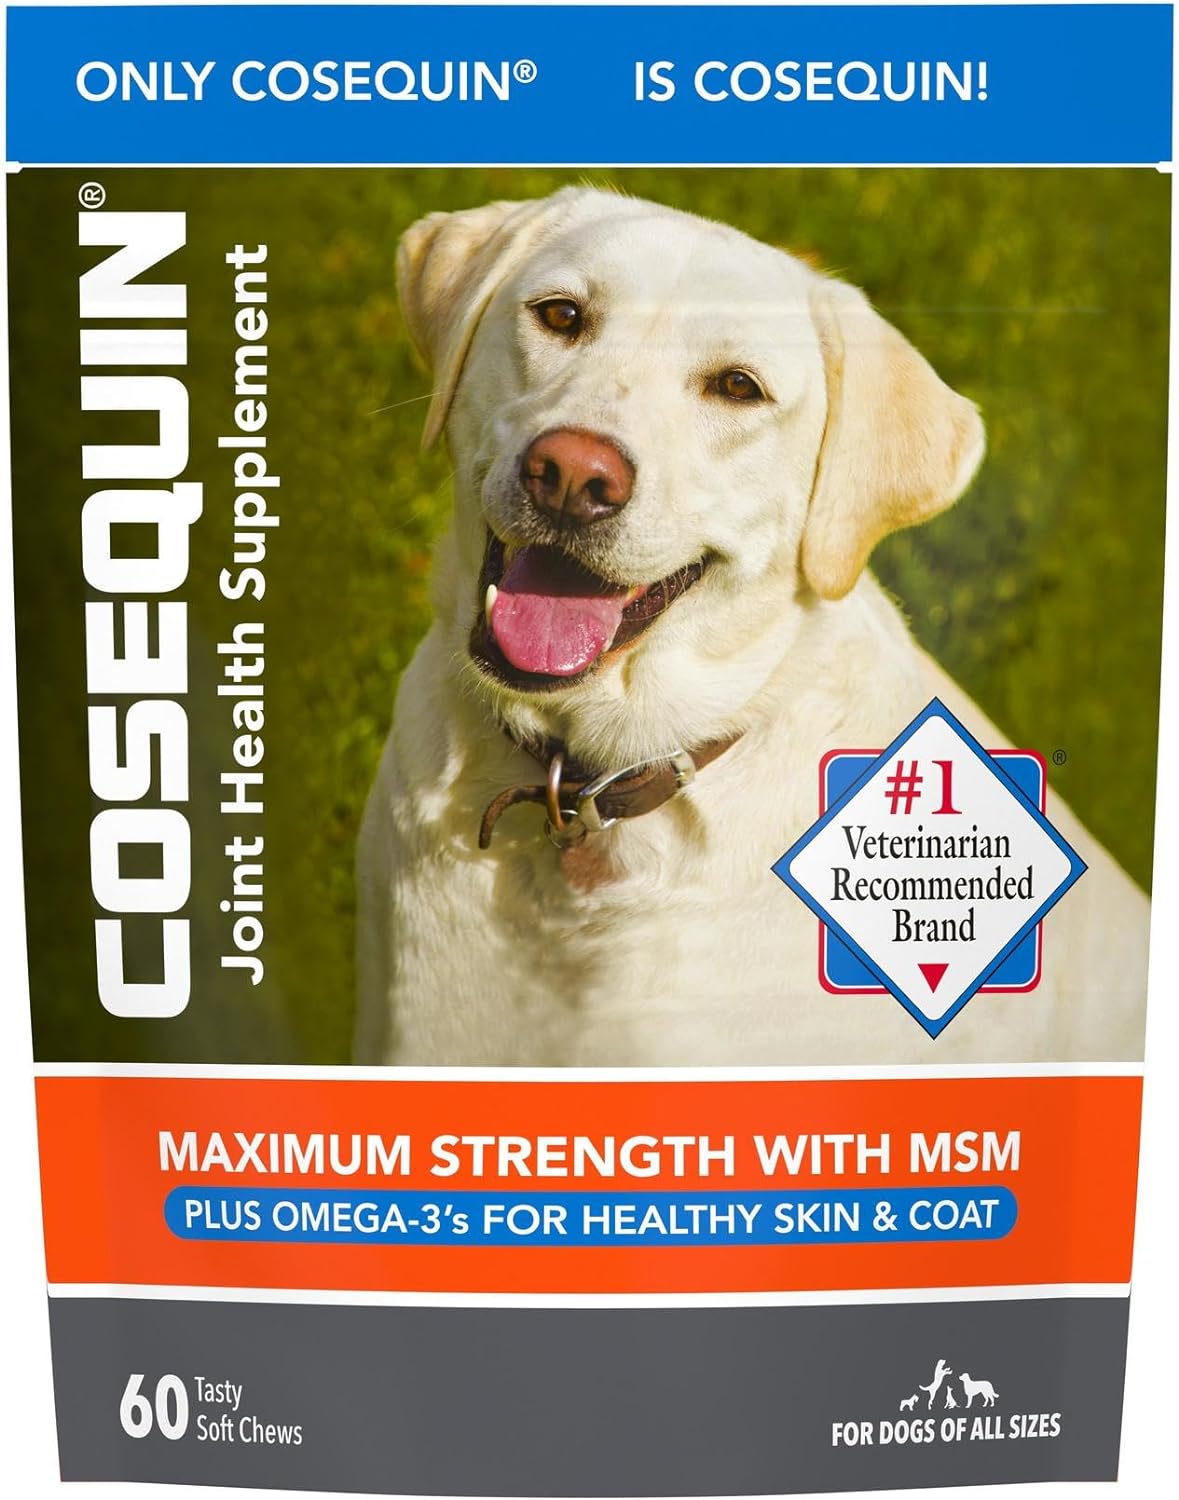 Nutramax Cosequin Joint Health Supplement for Dogs - With Glucosamine, Chondroitin, MSM, and Omega-3's, 60 Soft Chews